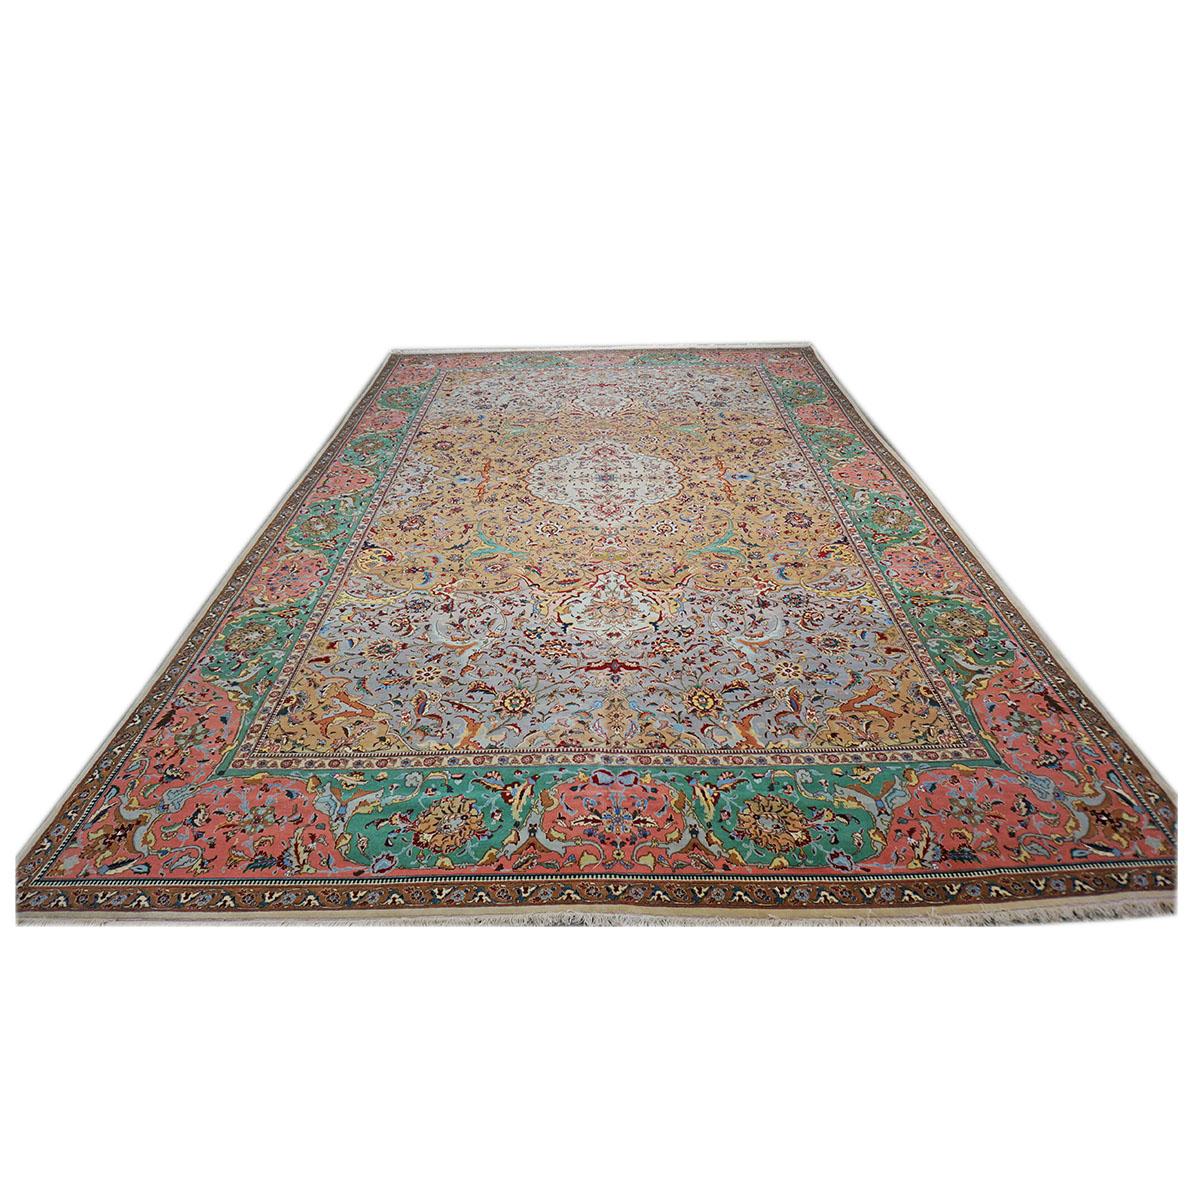 Ashly Fine Rugs presents a 1940s Antique Persian Pahlavi Tabriz 11x17 Oversized Wool Handmade Rug. Tabriz is a northern city in modern-day Iran and has forever been famous for the fineness and craftsmanship of its handmade rugs. These rugs are